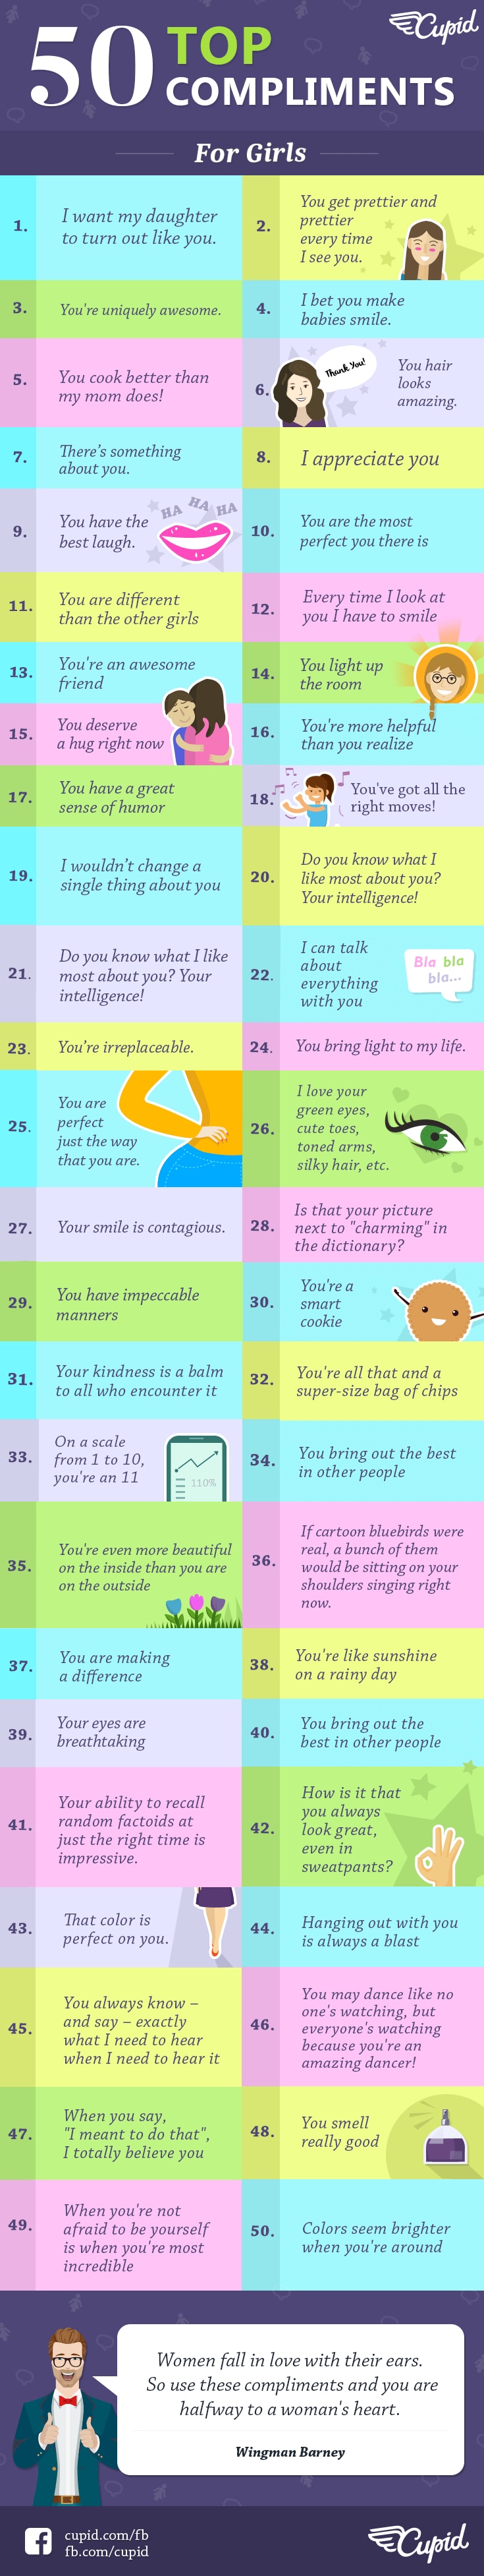 top 50 compliments for men